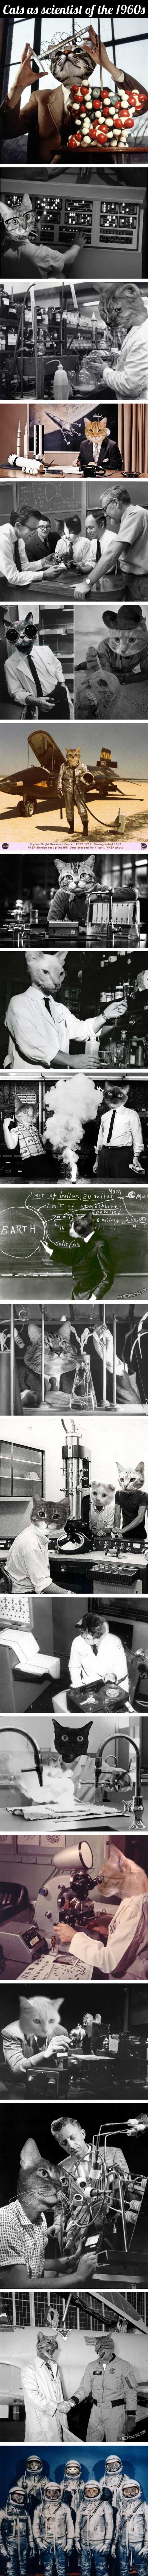 Cats as scientists.